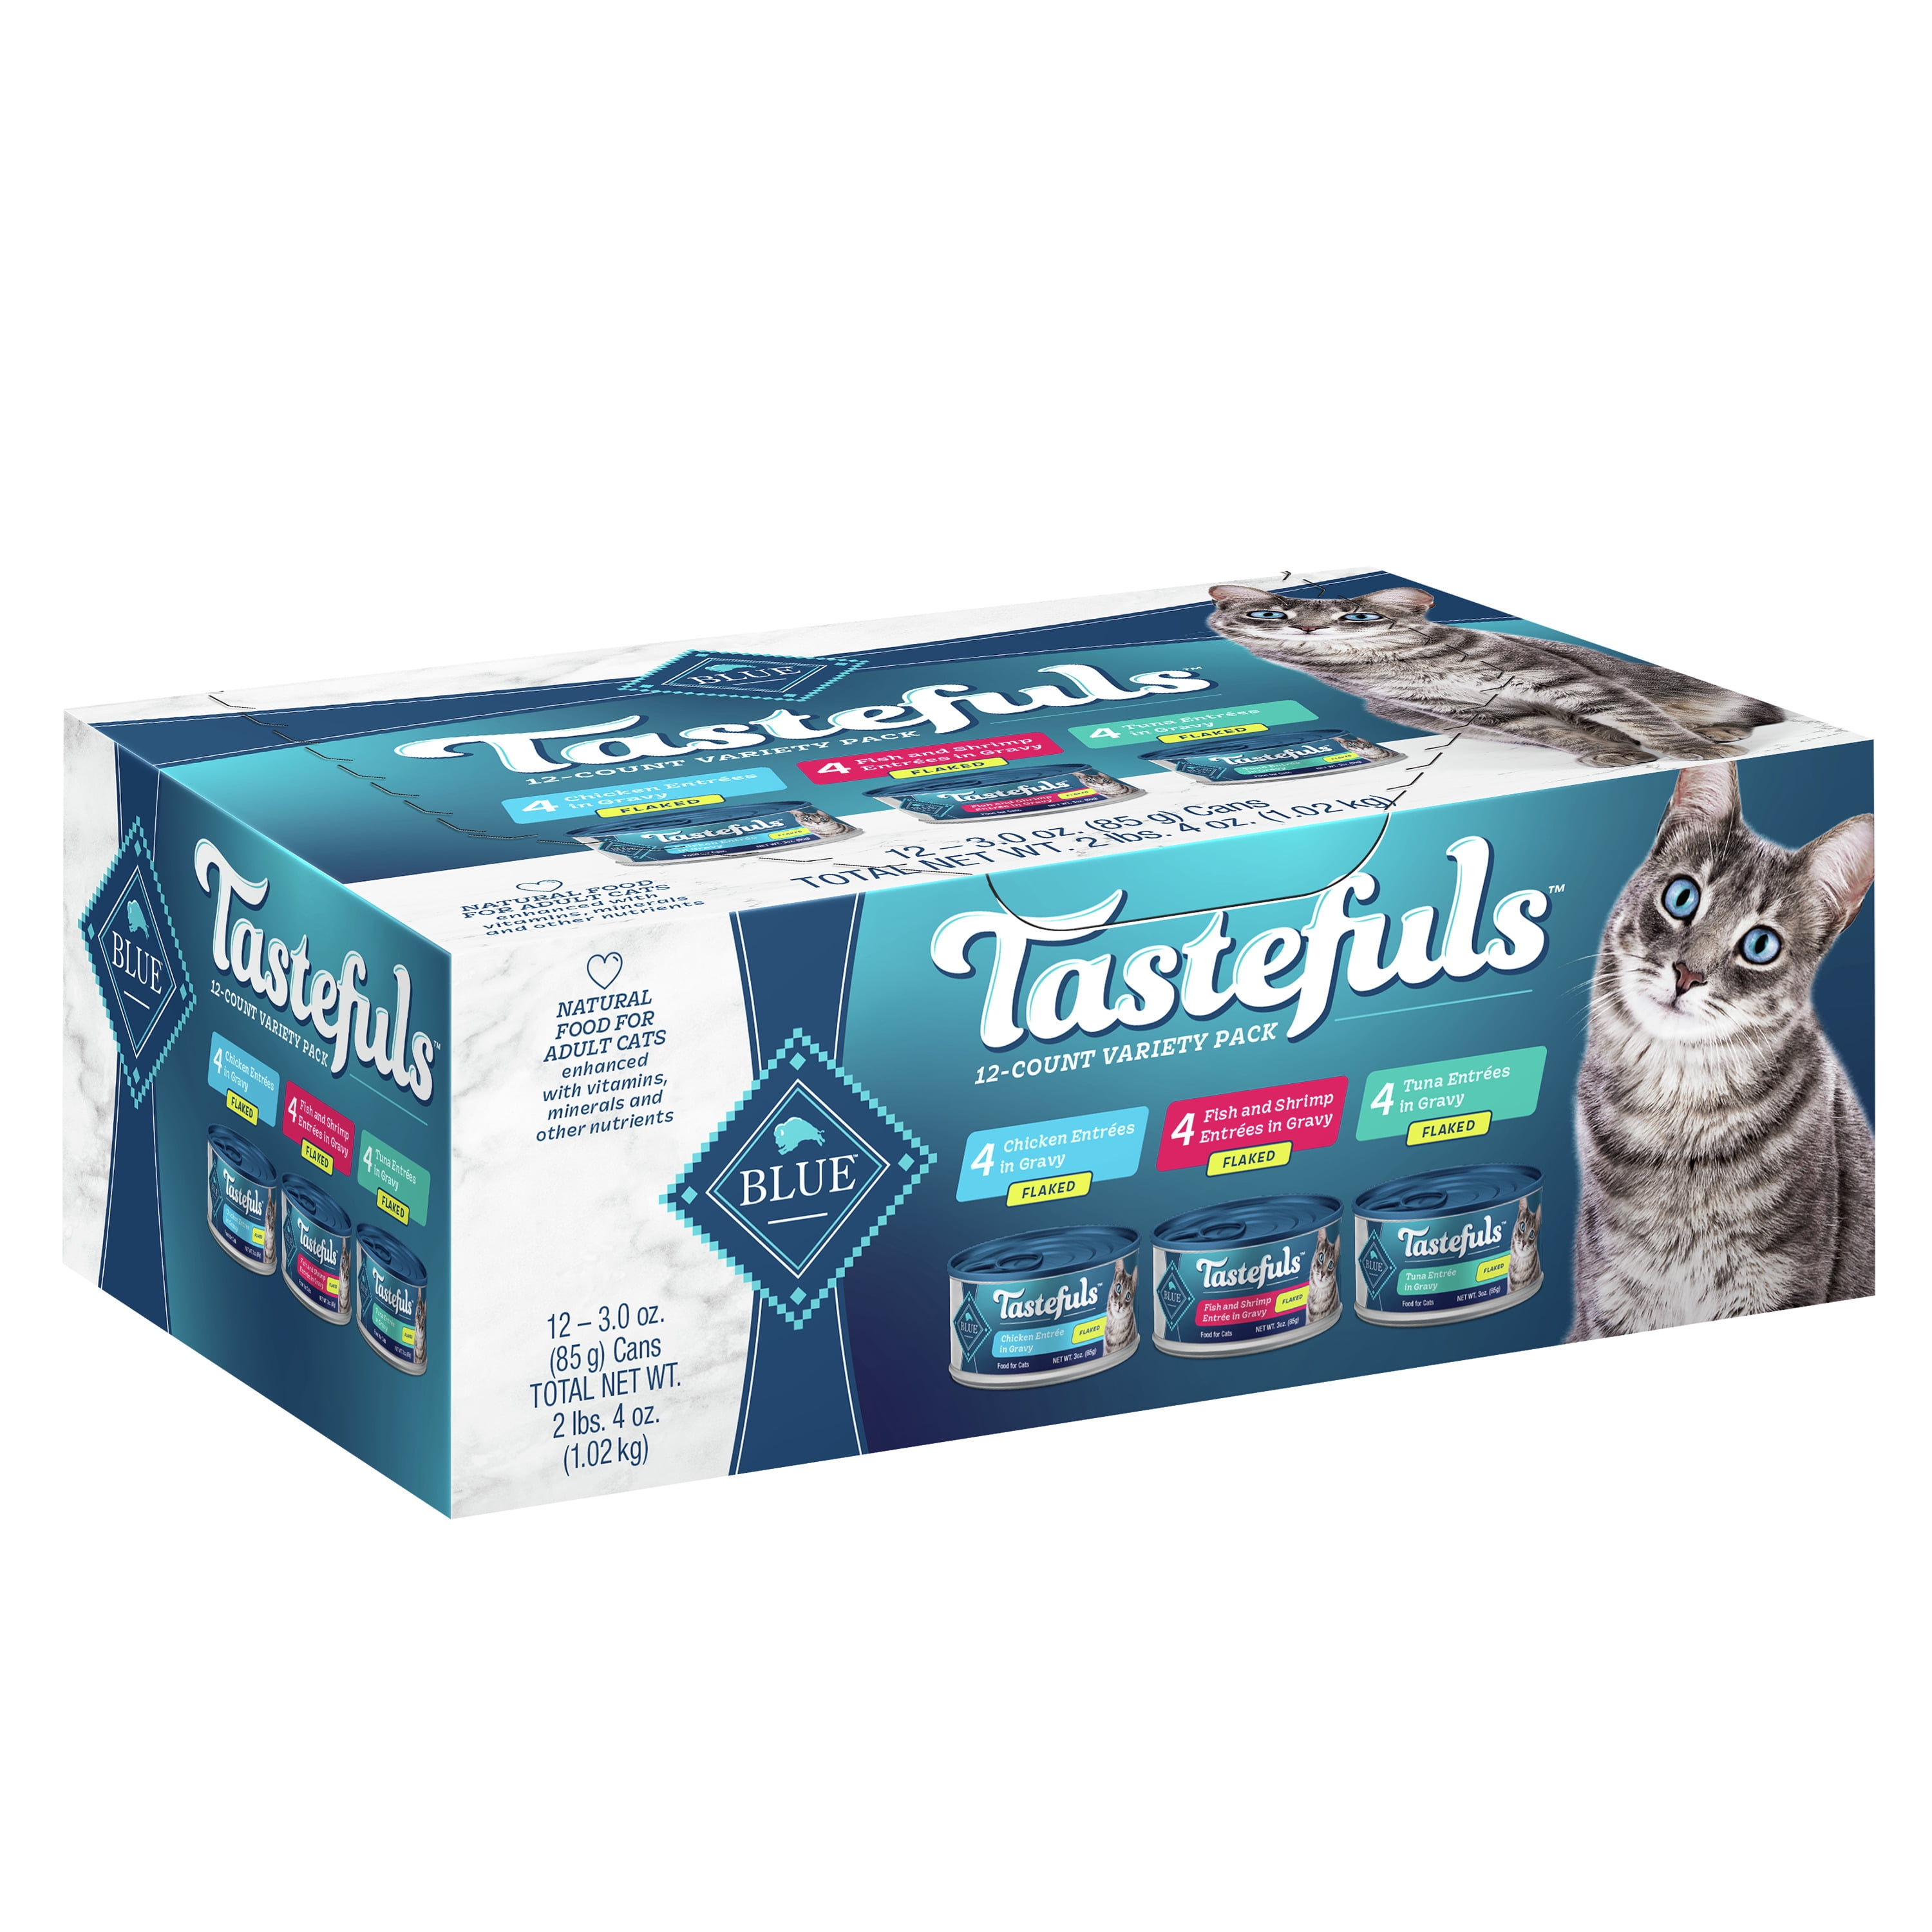 Blue Buffalo Tastefuls Tuna, Chicken, & Fish and Shrimp Flaked Wet Cat Food Variety Pack for Adult Cats, 3 oz. Cans (12 Pack)